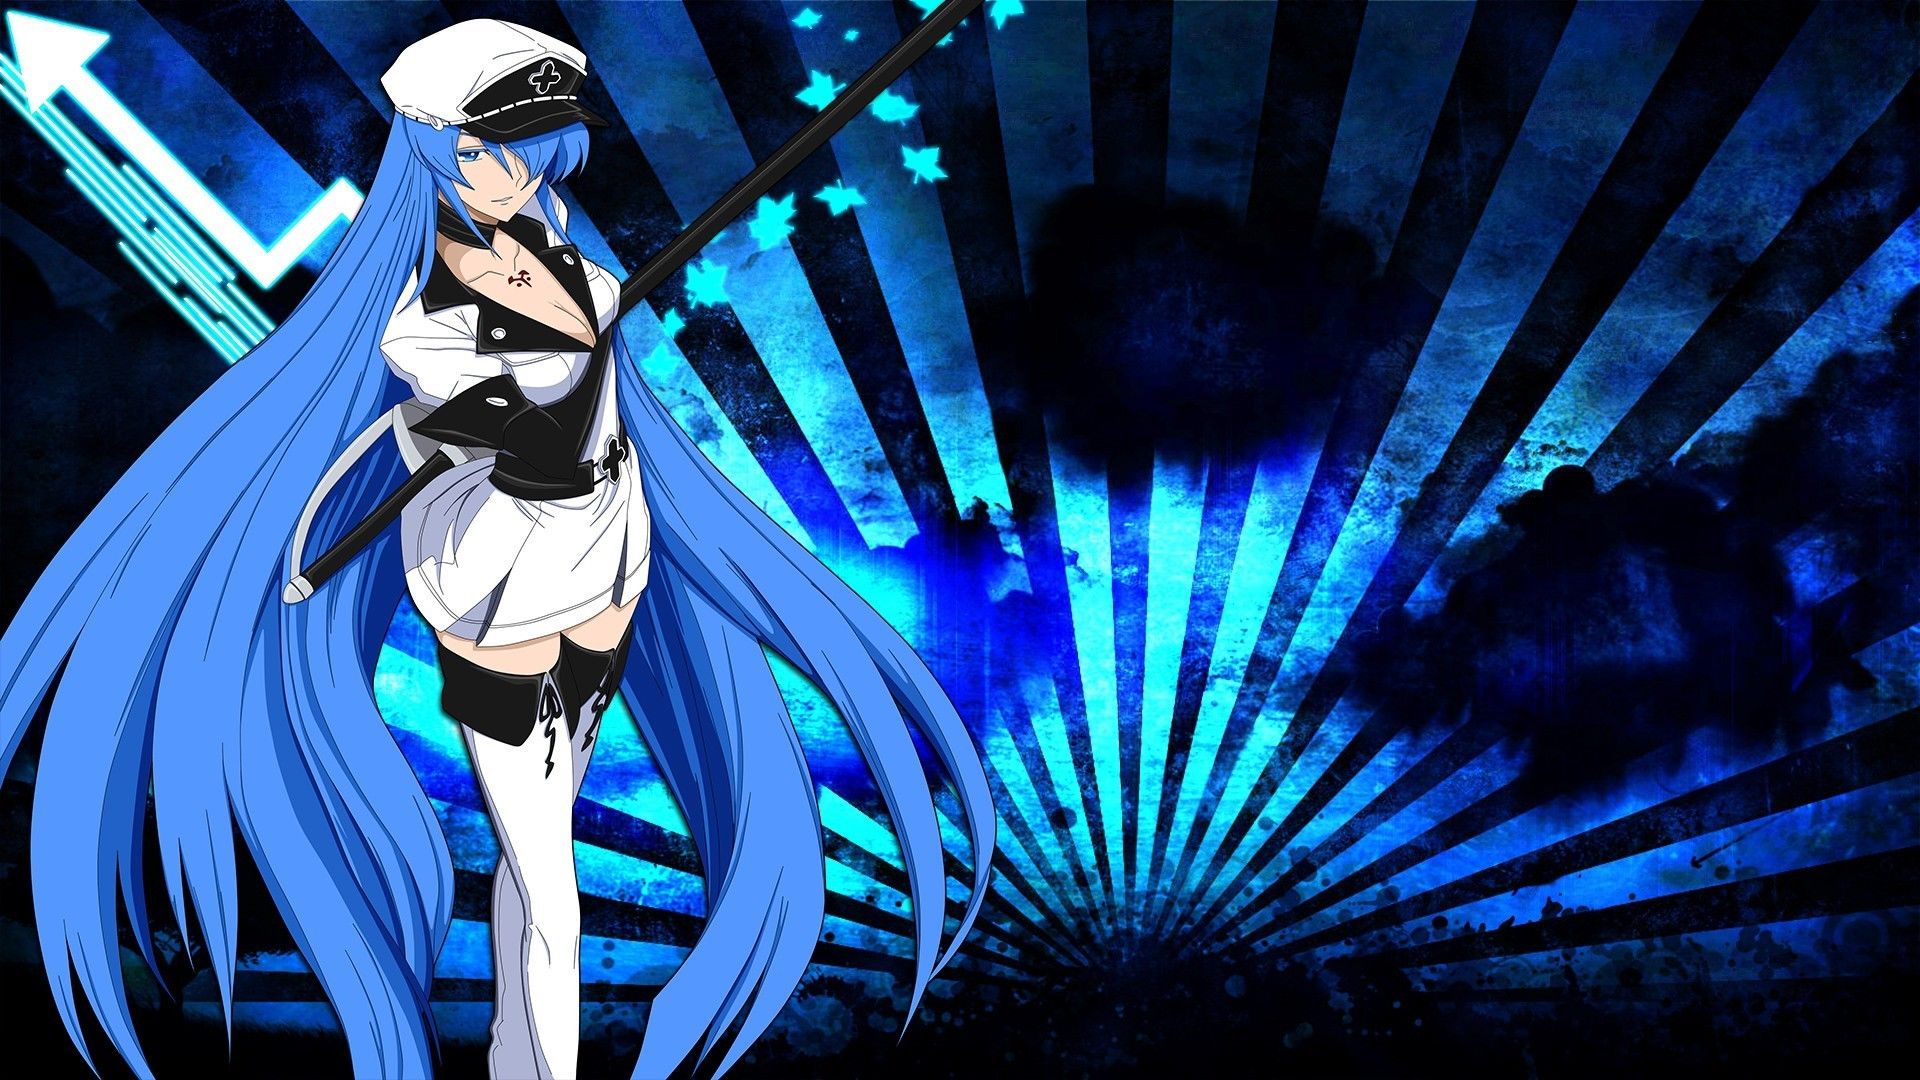 Esdeath Wallpaper background picture